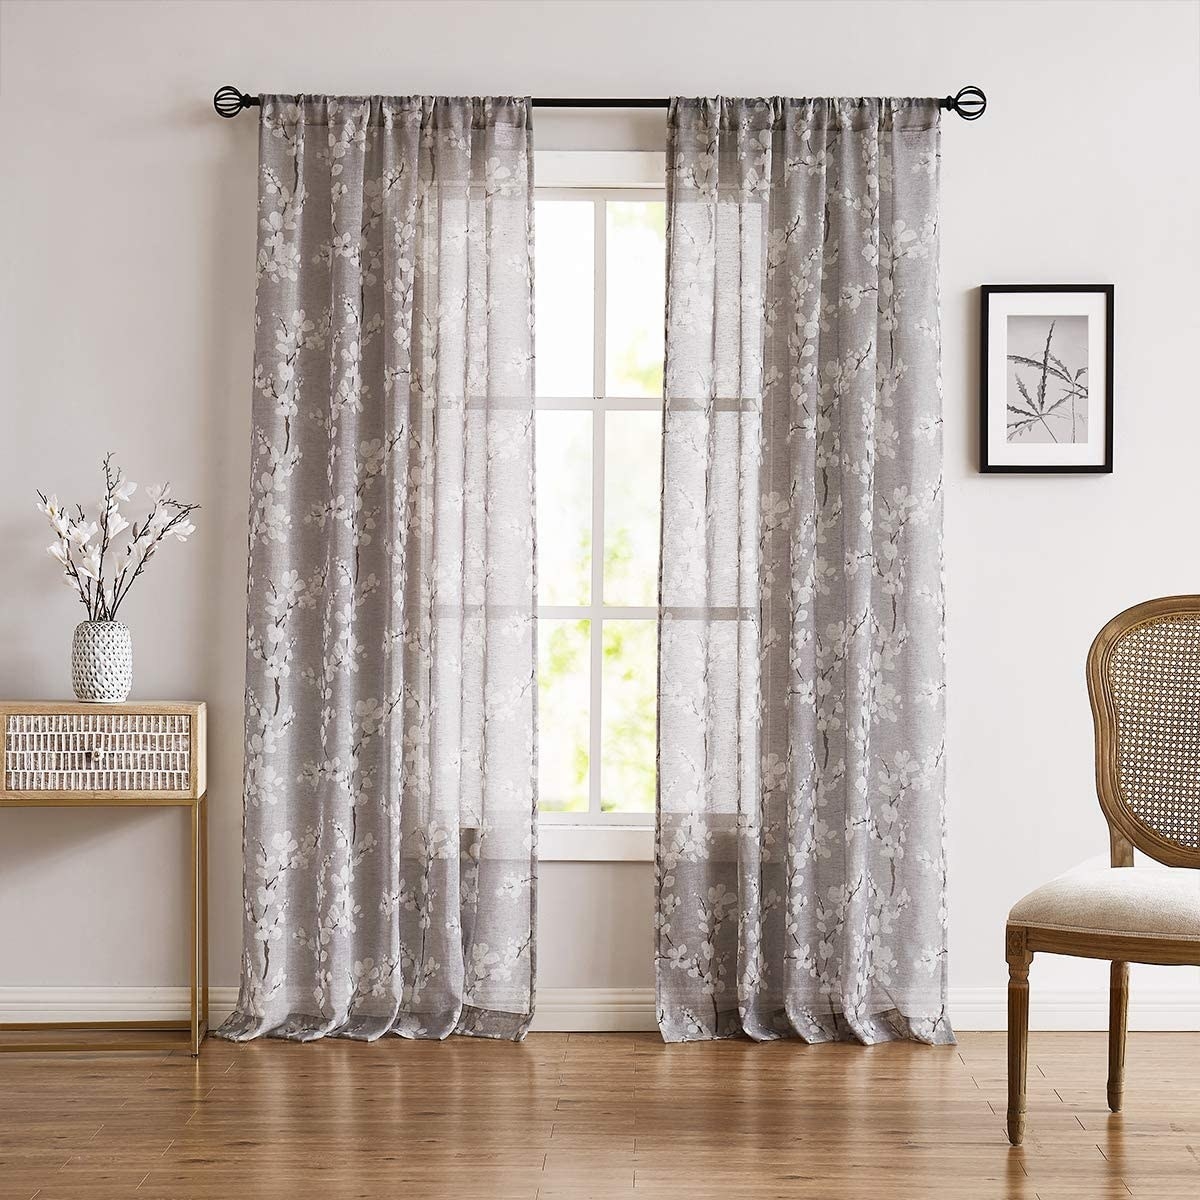 a pair of sheer, floral curtains on a large window